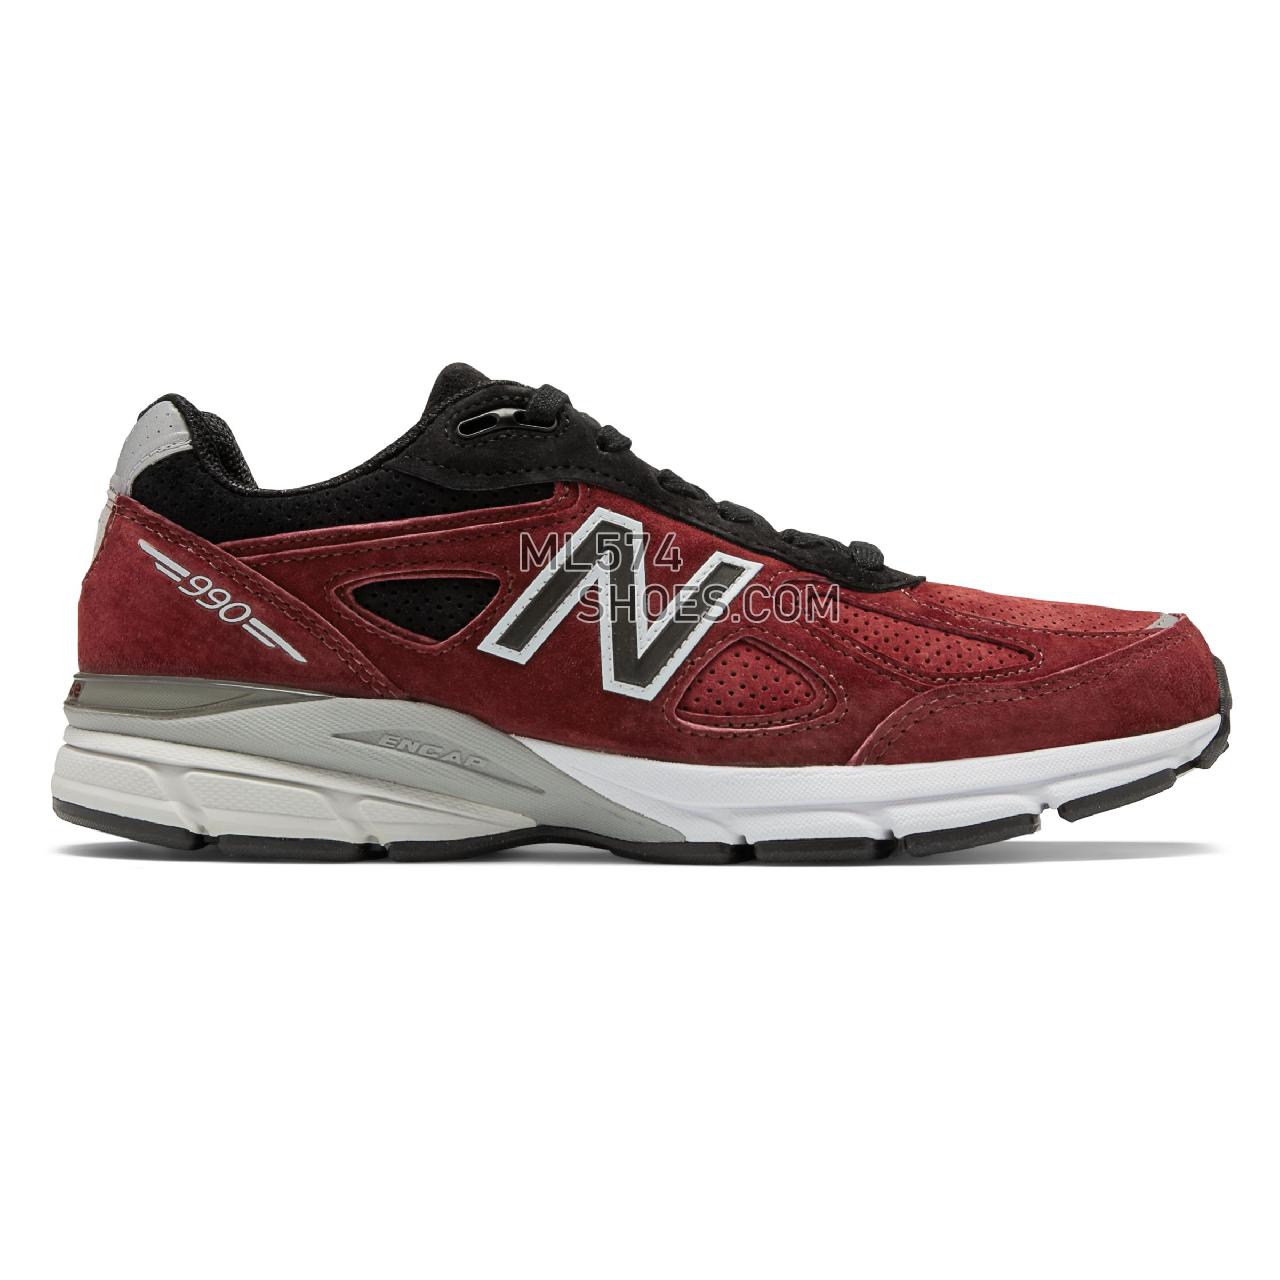 New Balance Mens 990v4 Made in US - Men's 990 - Running Mercury Red with Black - M990RB4